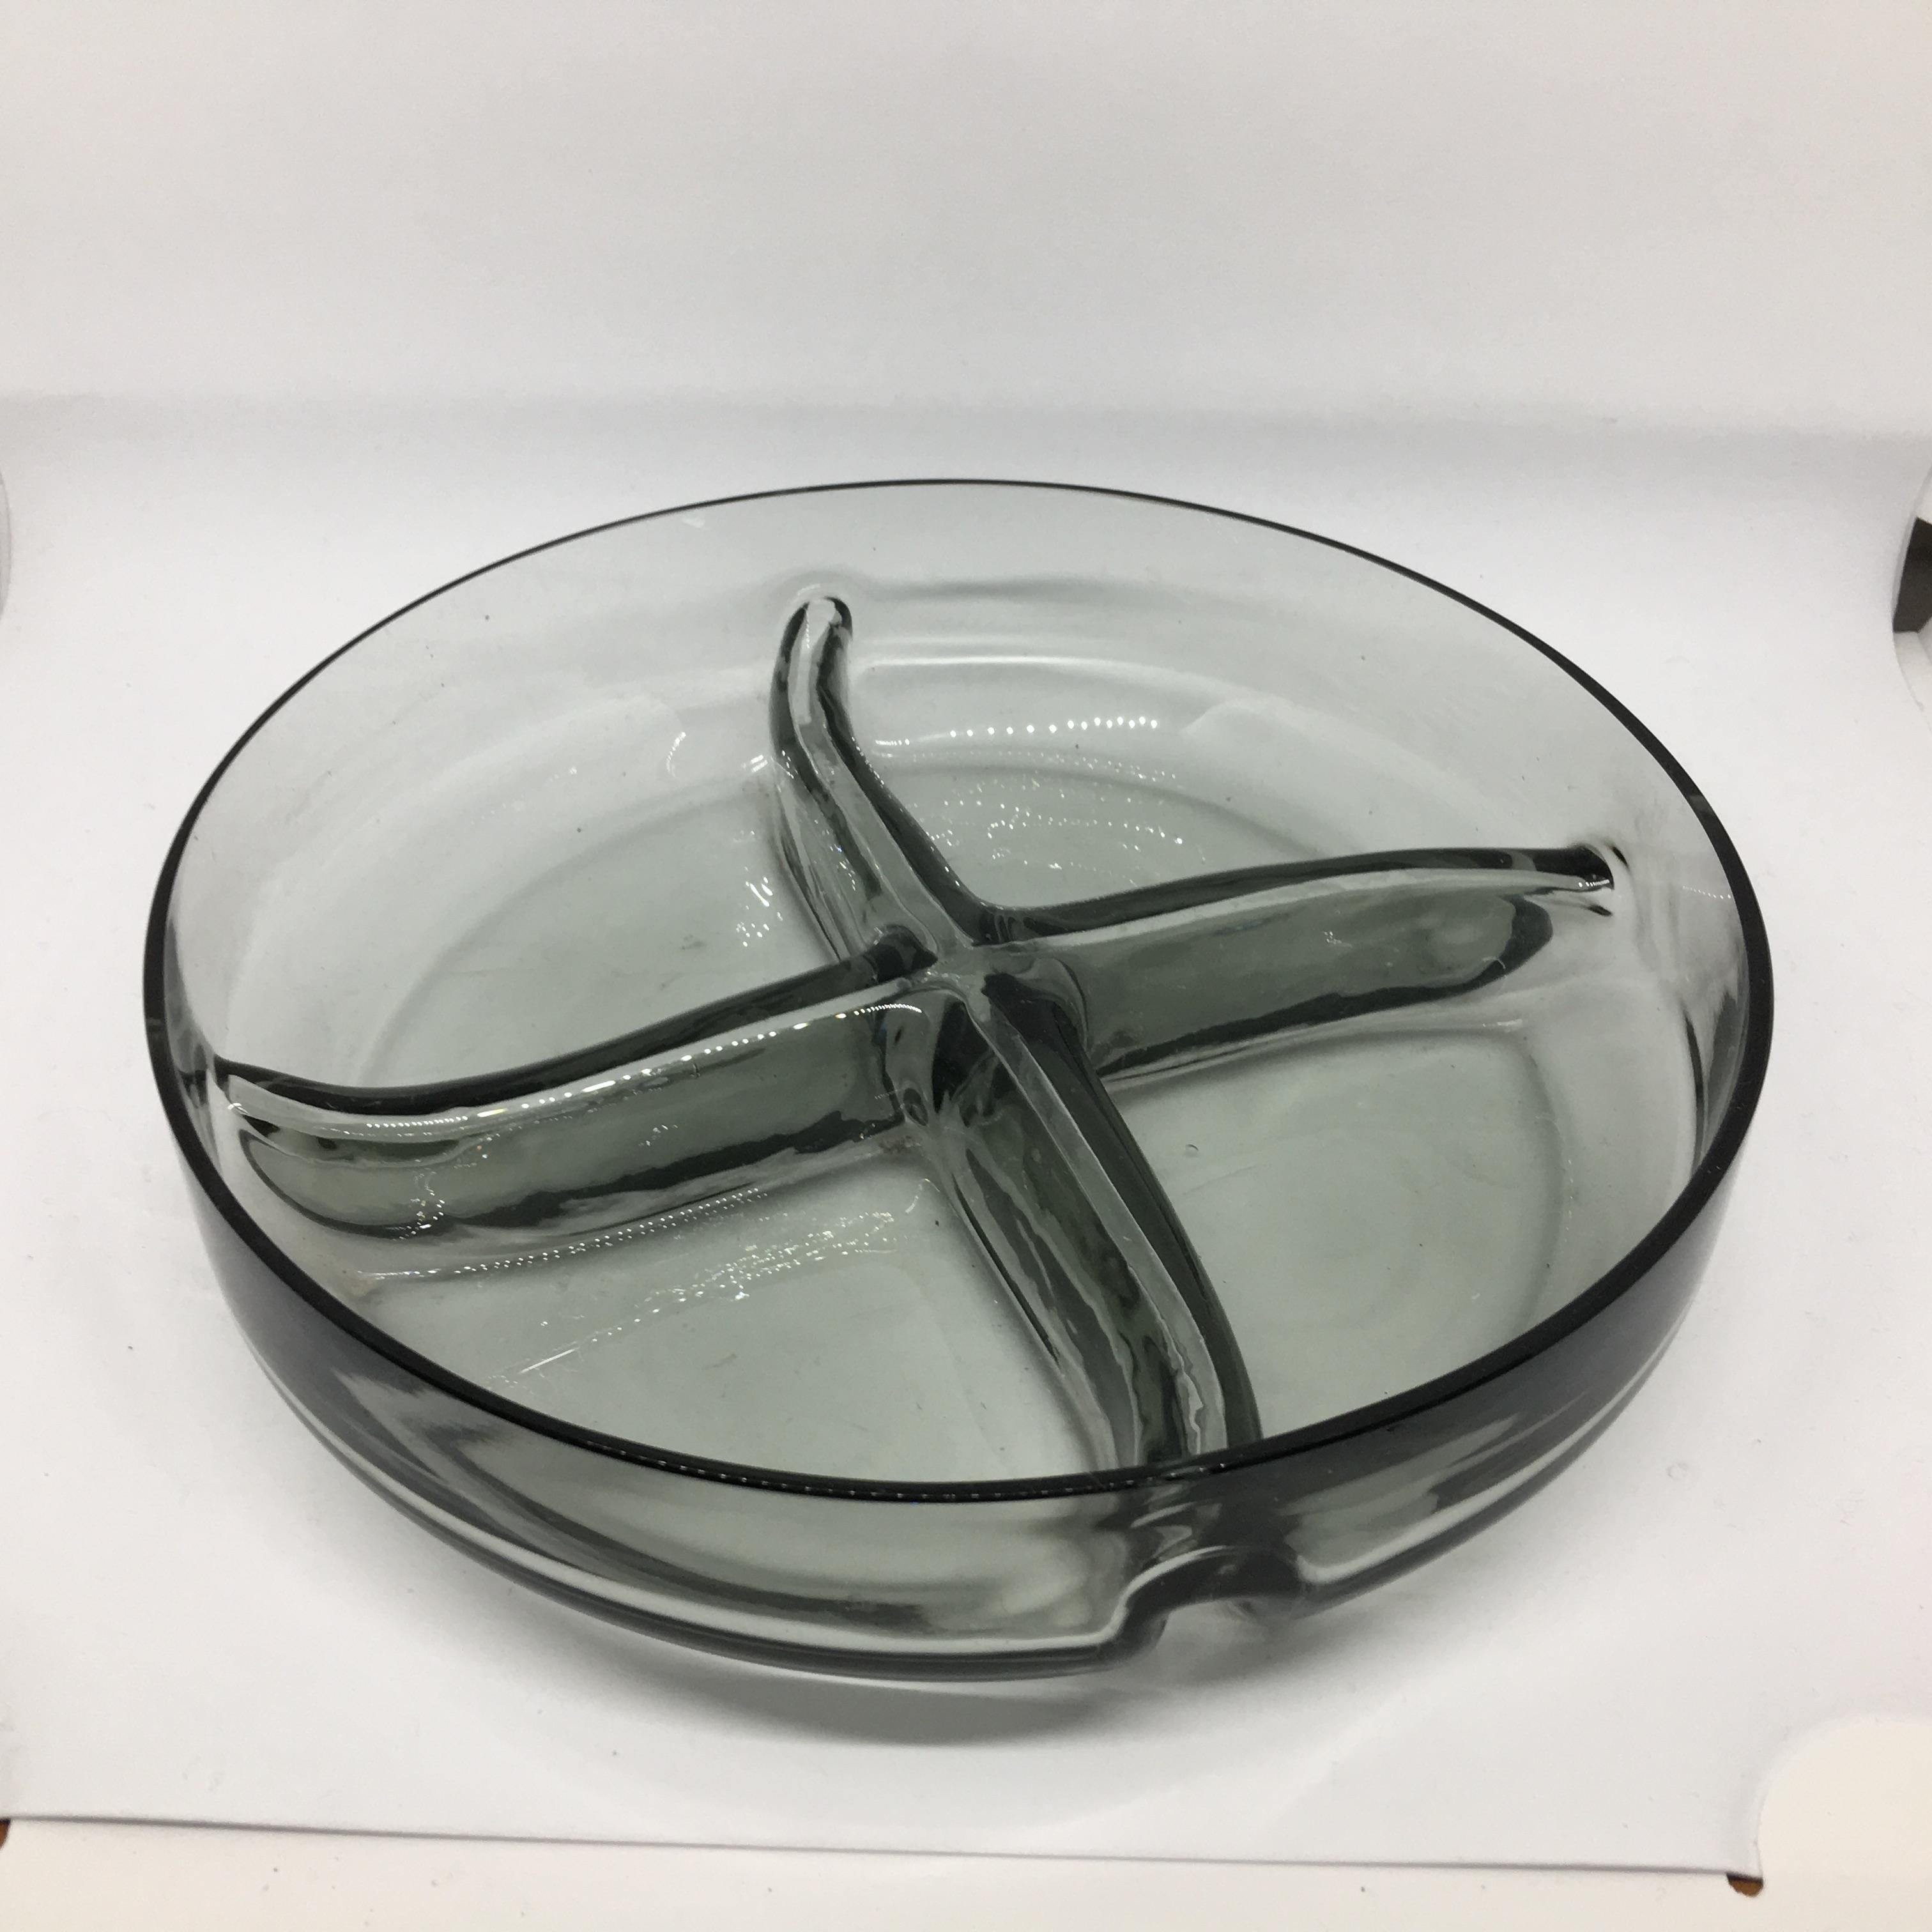 Modernist Italian Silver Plated Centerpiece Designed by Enrico Baldaro, 1970 For Sale 4